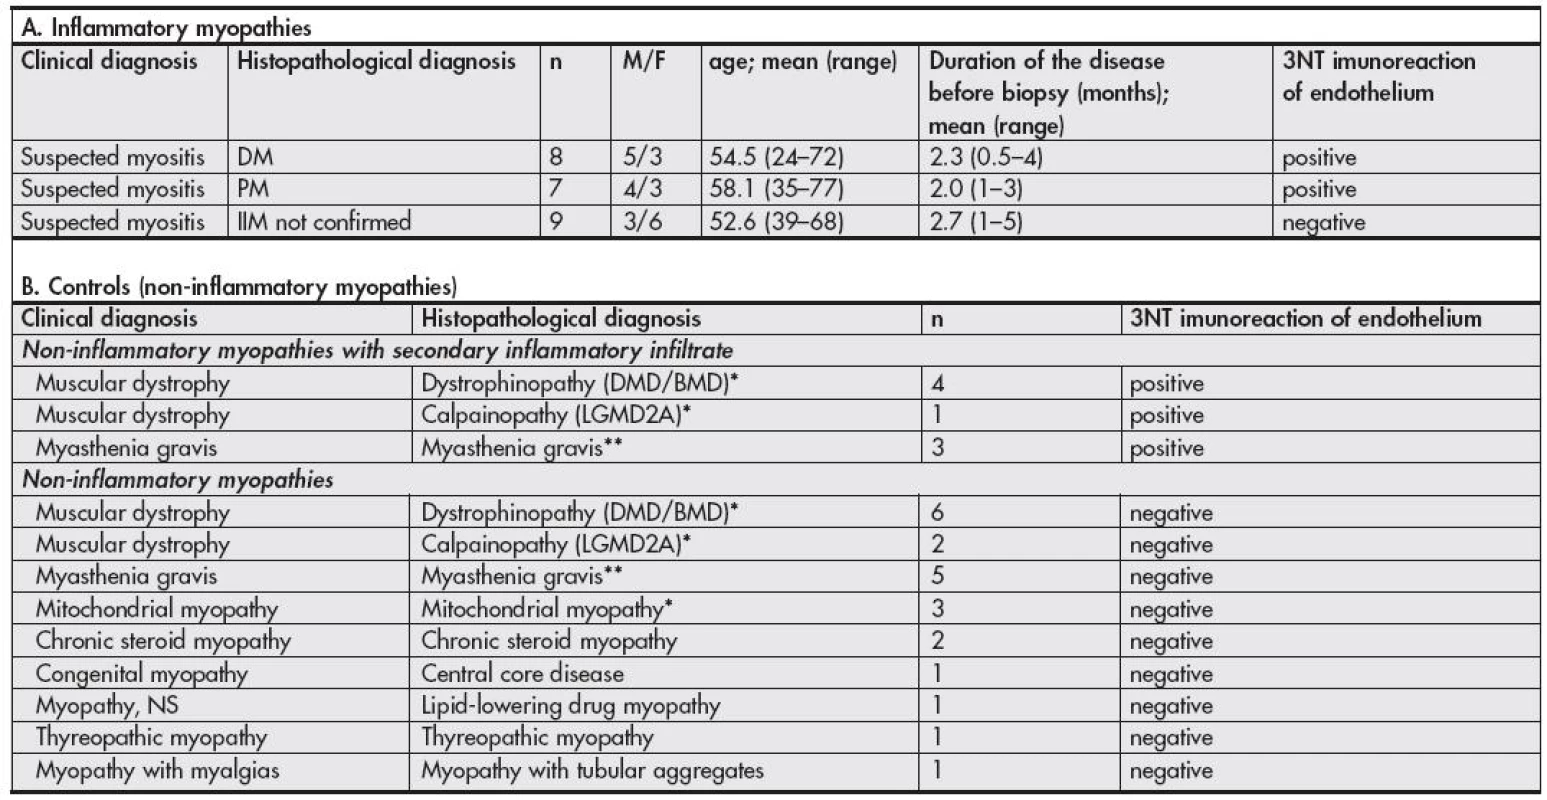 Characteristics of cases enrolled into the study and results of 3NT immunodetection